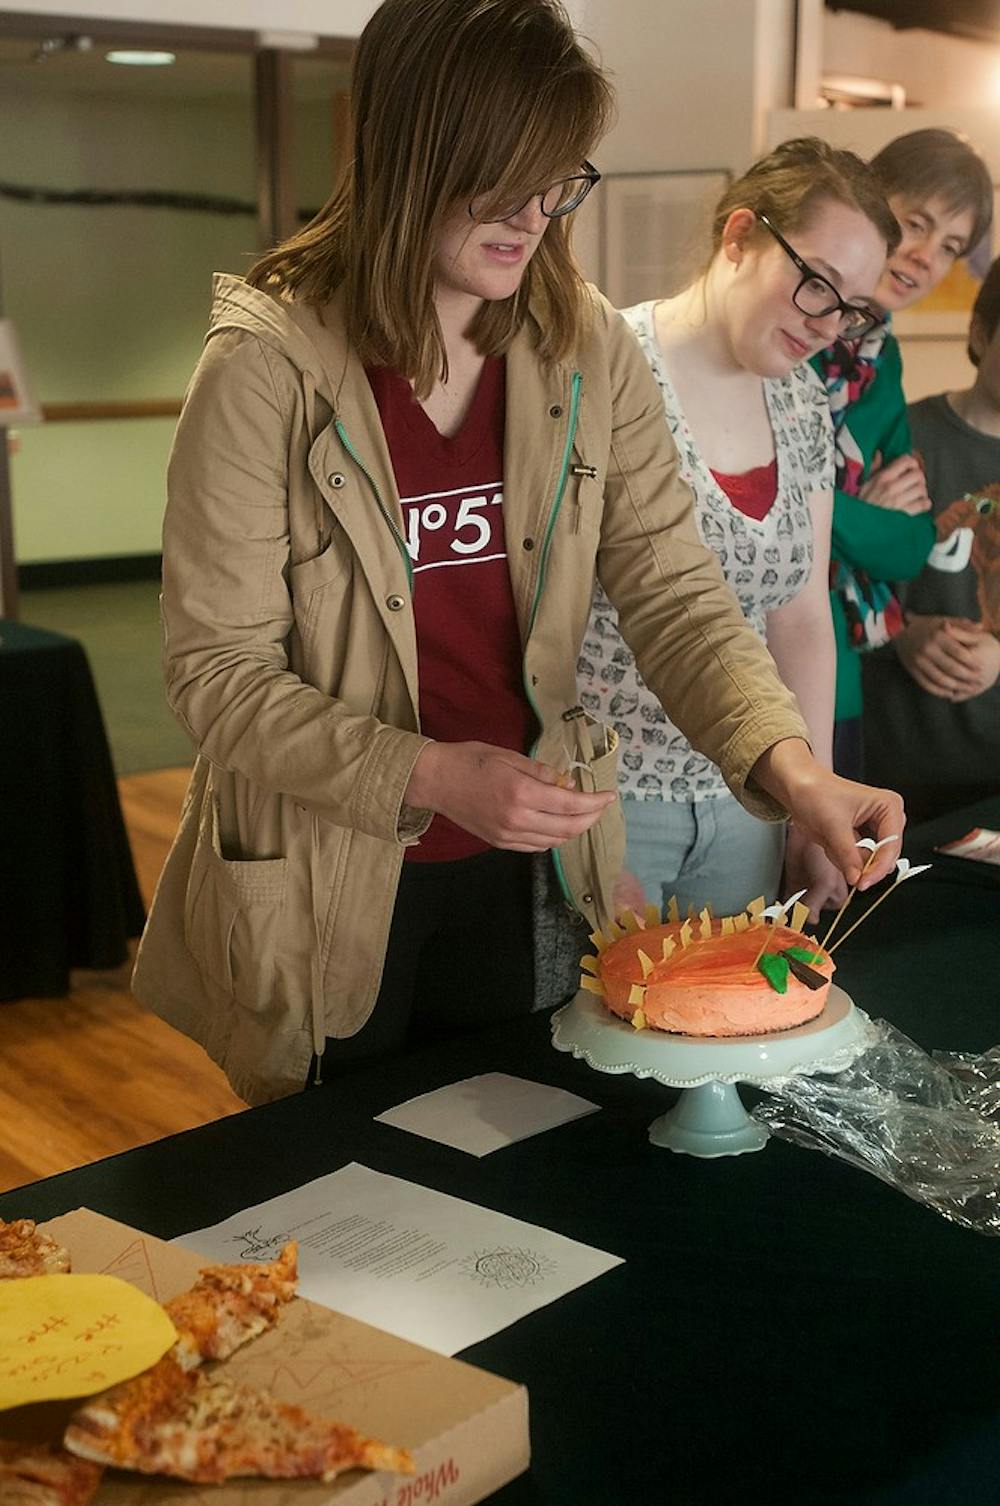 <p>Arts and humanities senior Darby McGaw puts the finishing touches on her James and the Giant Peach inspired cake April 1, 2015, at the Center for Poetry's Edible Book Contest hosted by the Residential College in the Arts and Humanities. McGaw's cake won best in Children's Literature. Kennedy Thatch/The State News  </p>